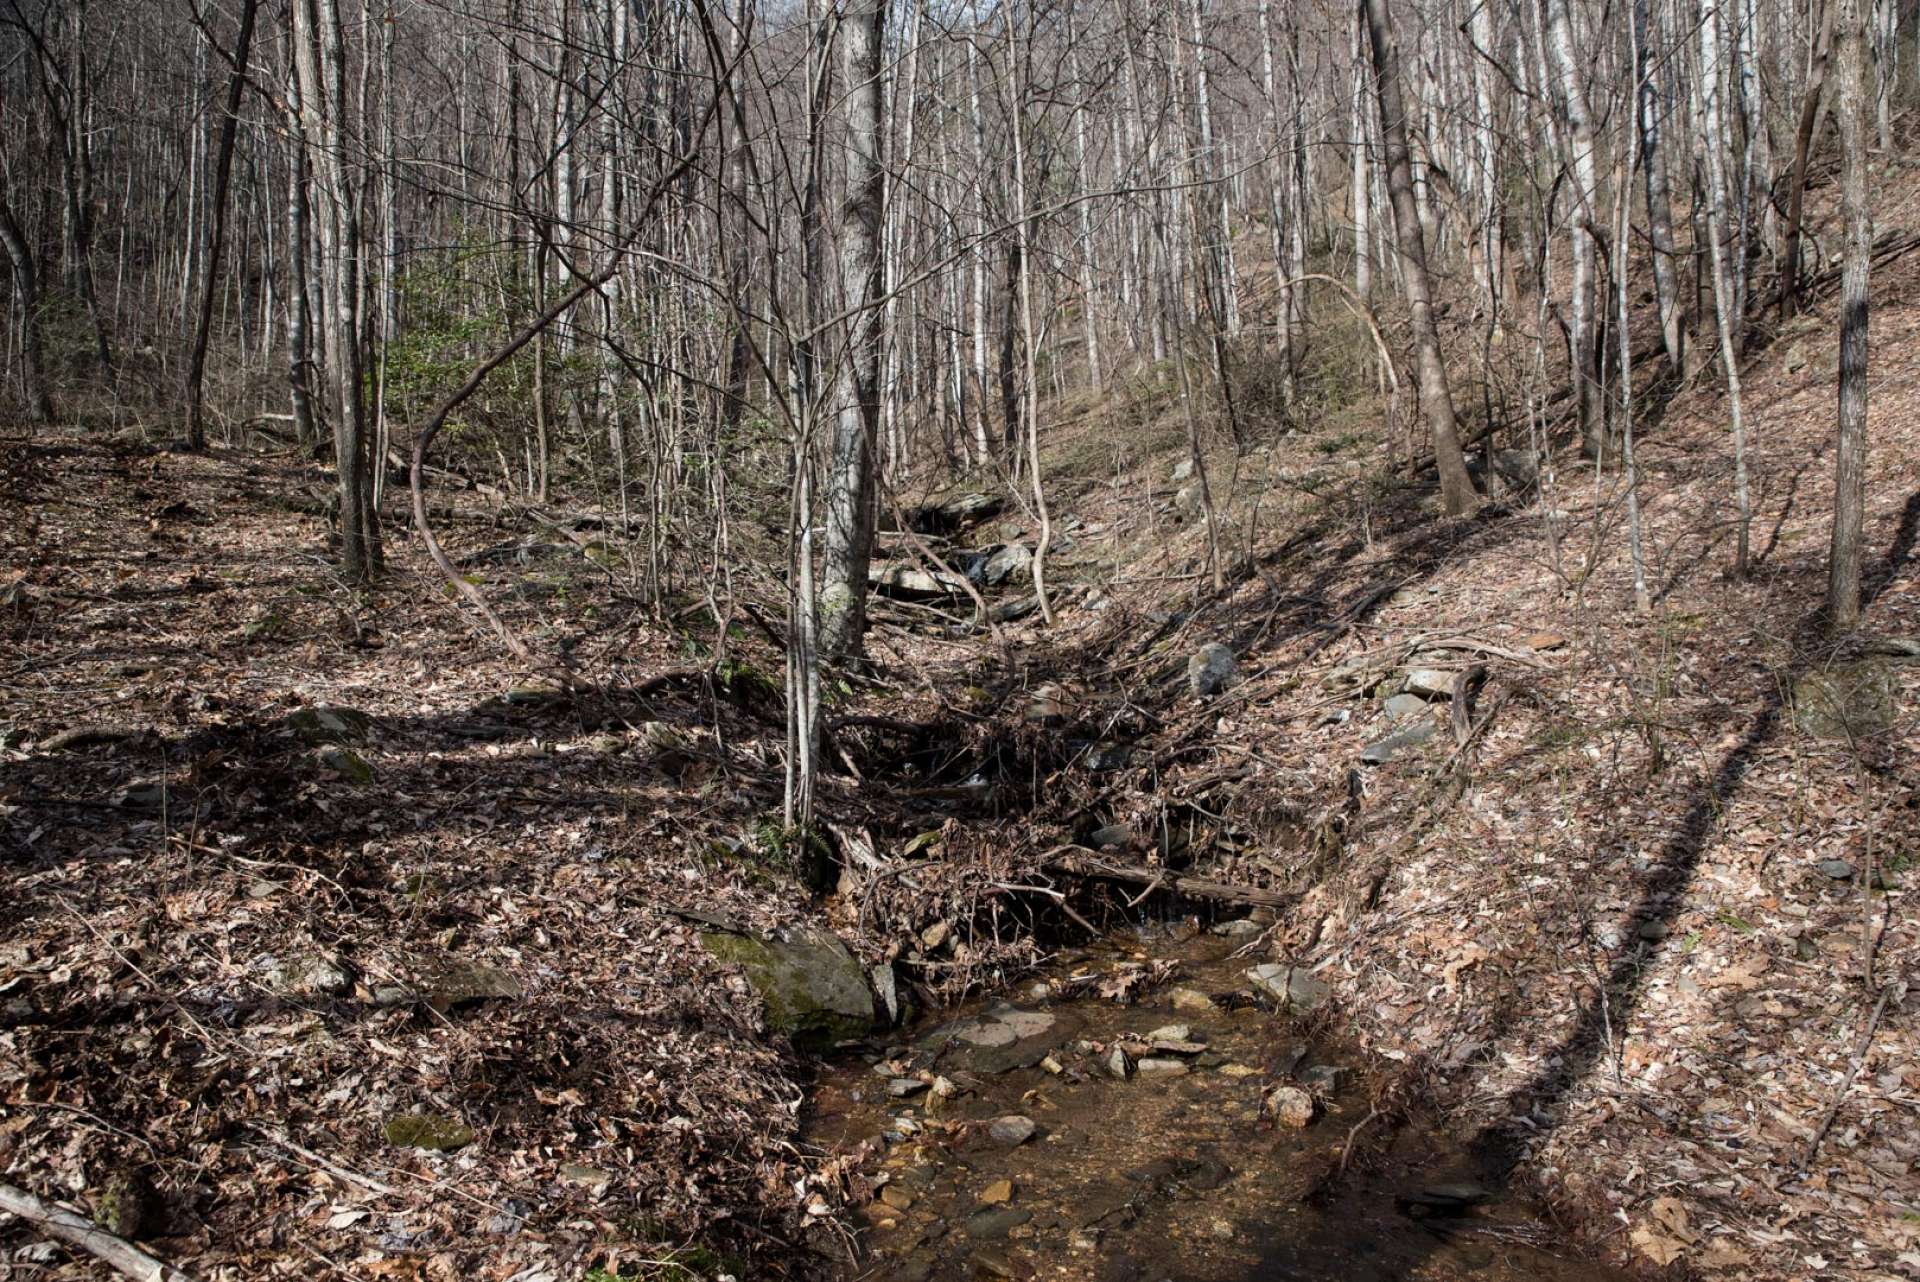 Complete with a small mountain stream, this property is perfect for those looking to develop,  hunting tract, or simply looking for a private mountain land tract to build their mountain home or cabin.